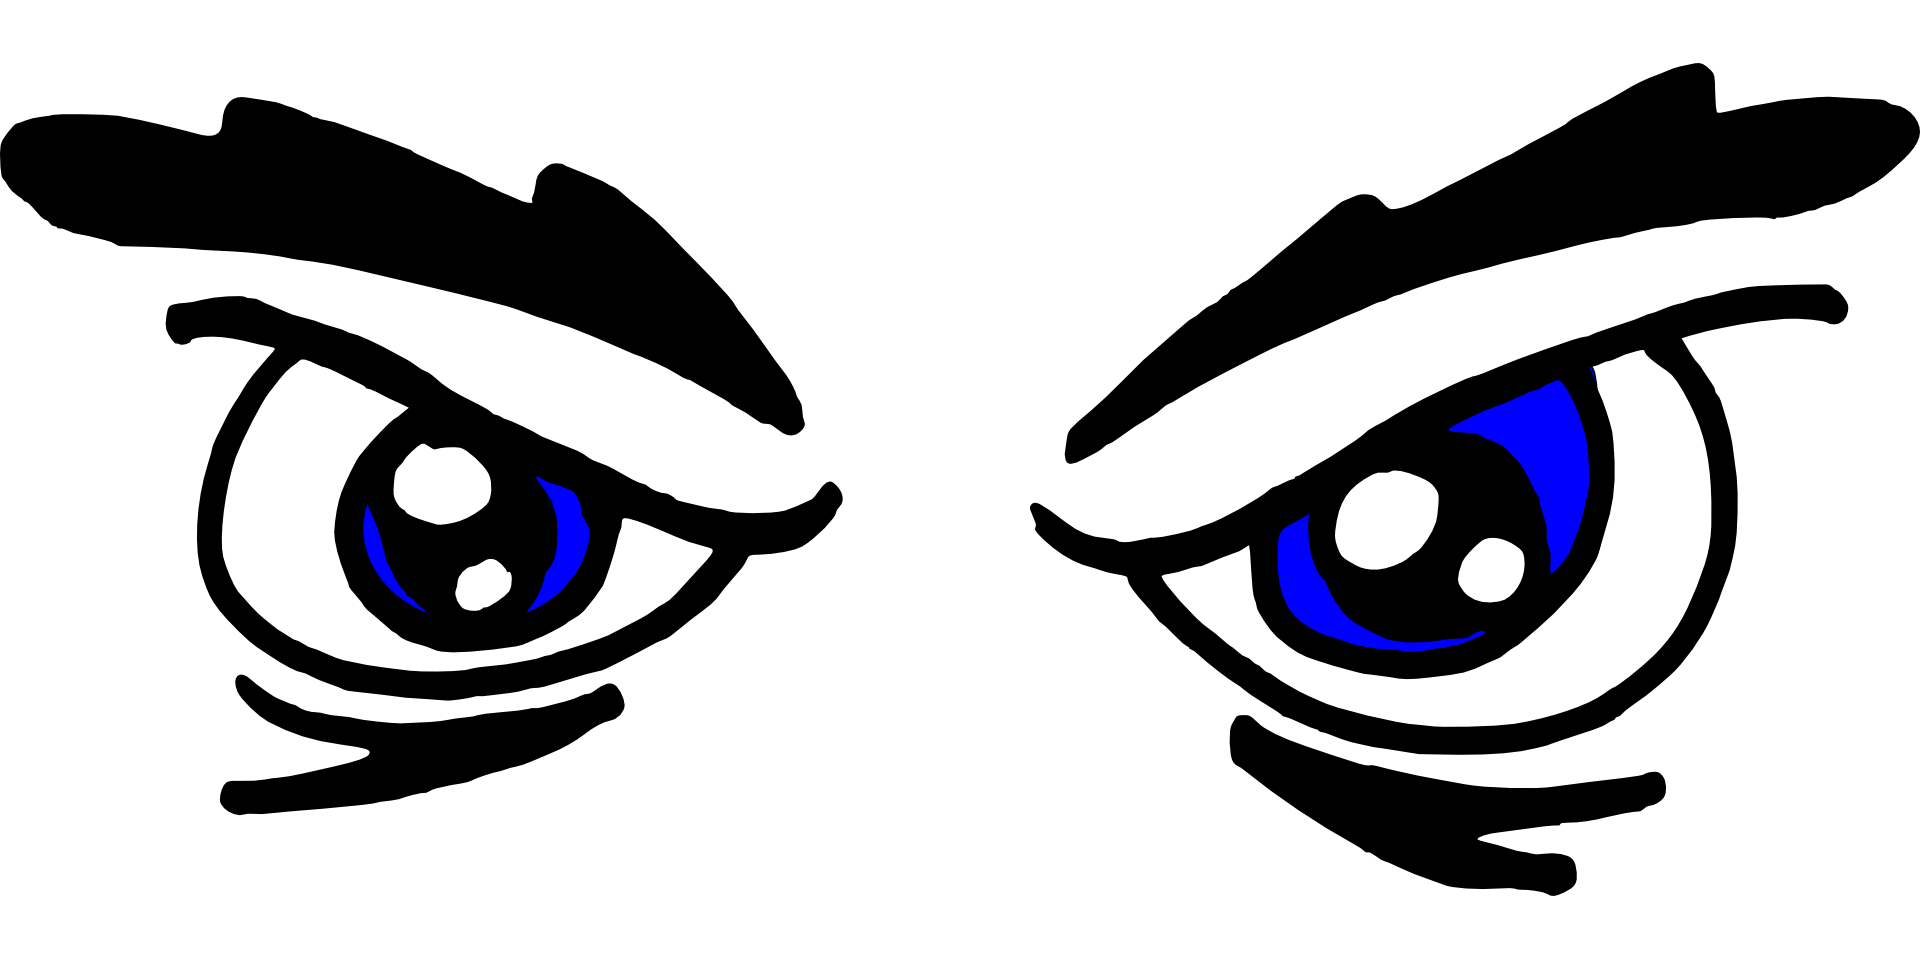 Angry eyes as a drawing free image download